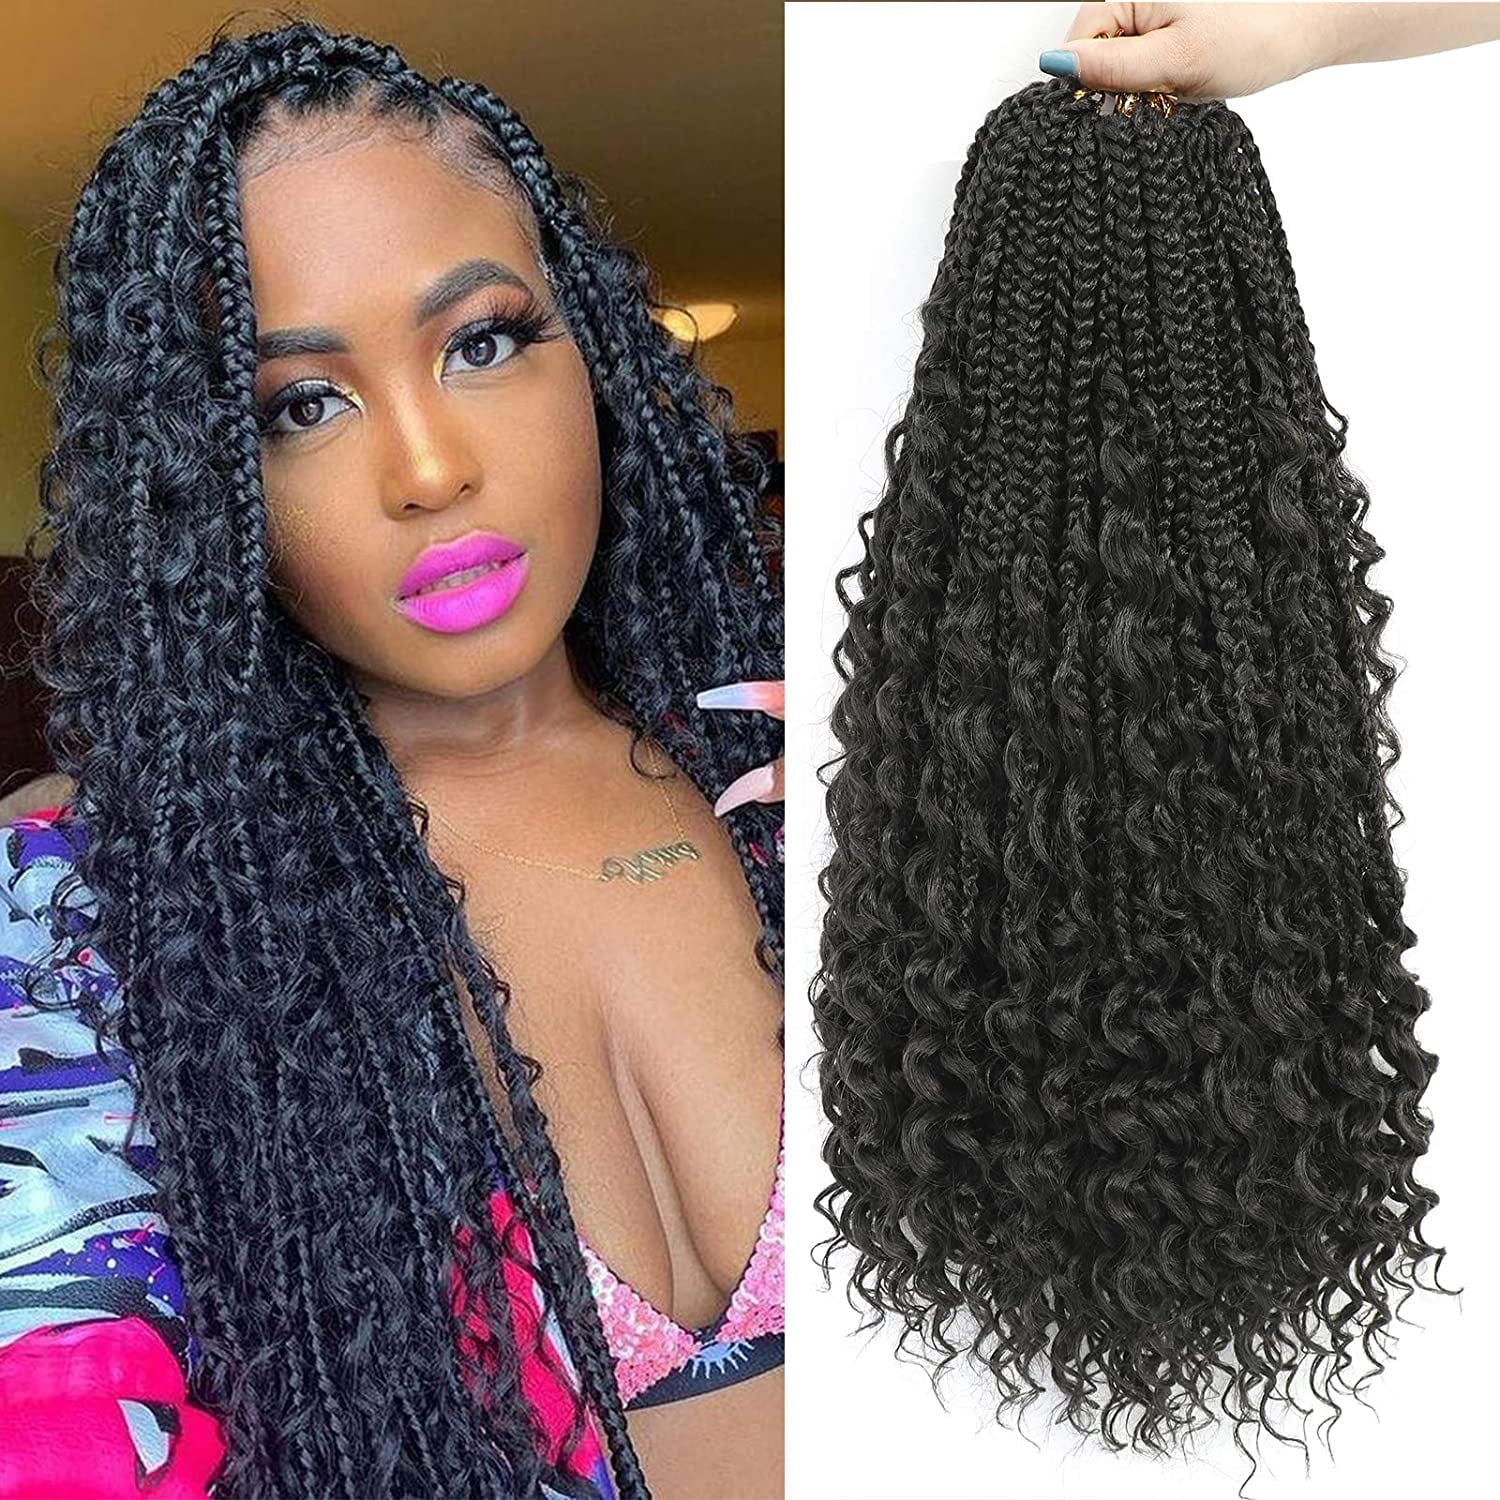 12 Bohemian Box Braids Styles for Black Women to Try in 2022  Curlfit